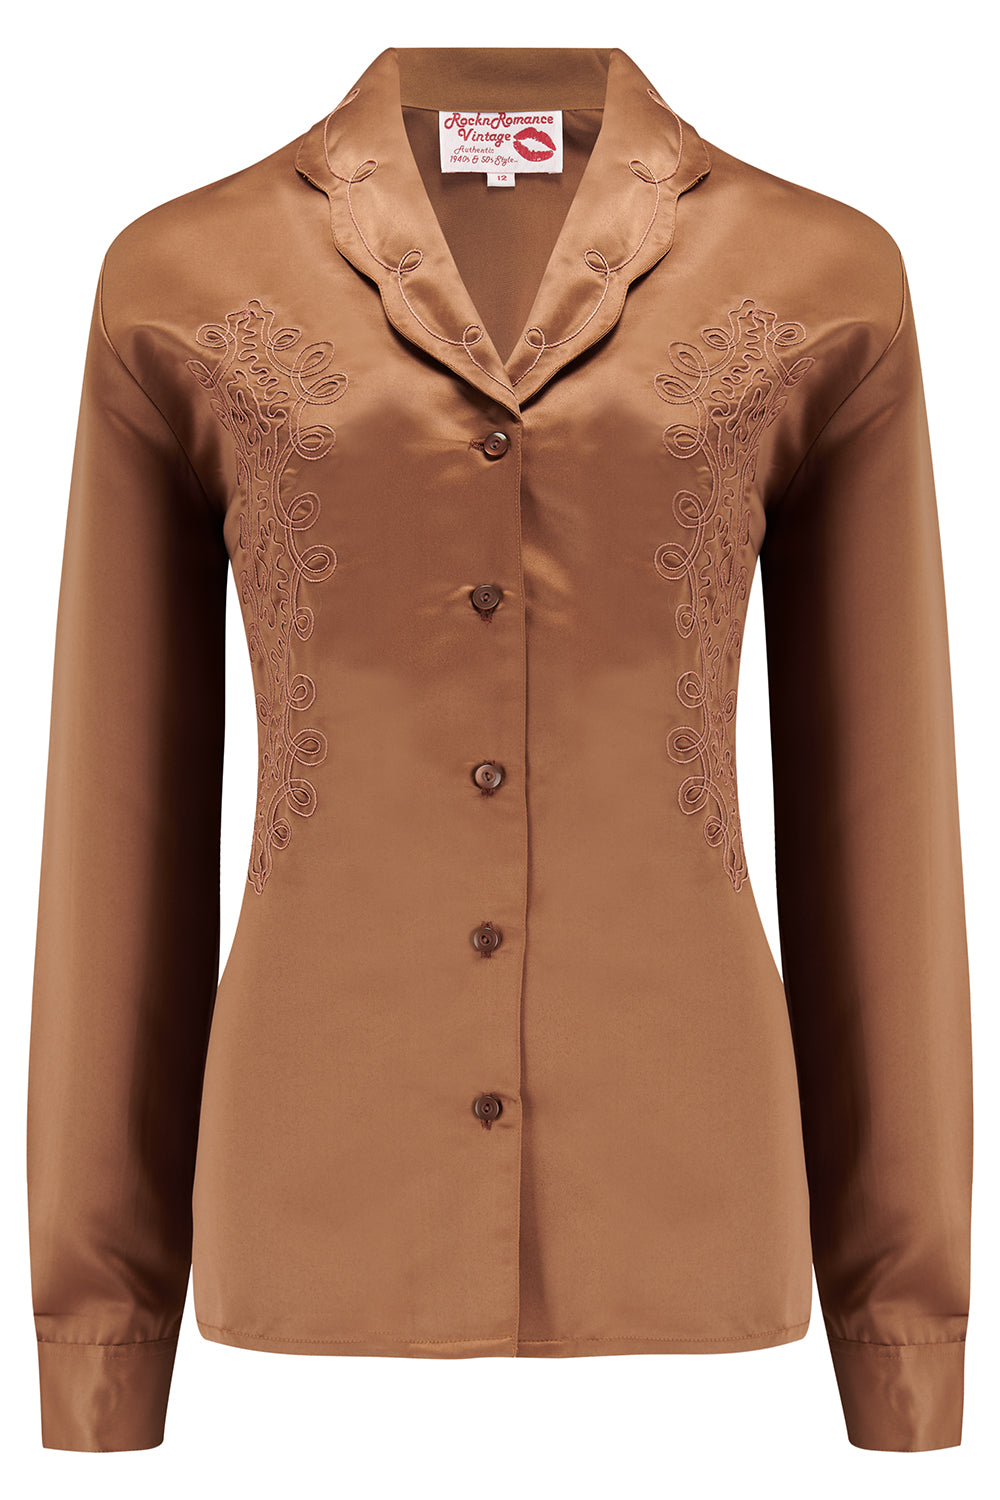 RnR "Luxe" Range.. The "Valarie" Long Sleeve Embroidered Blouse in Super Luxurious Golden Pecan Brown SATIN